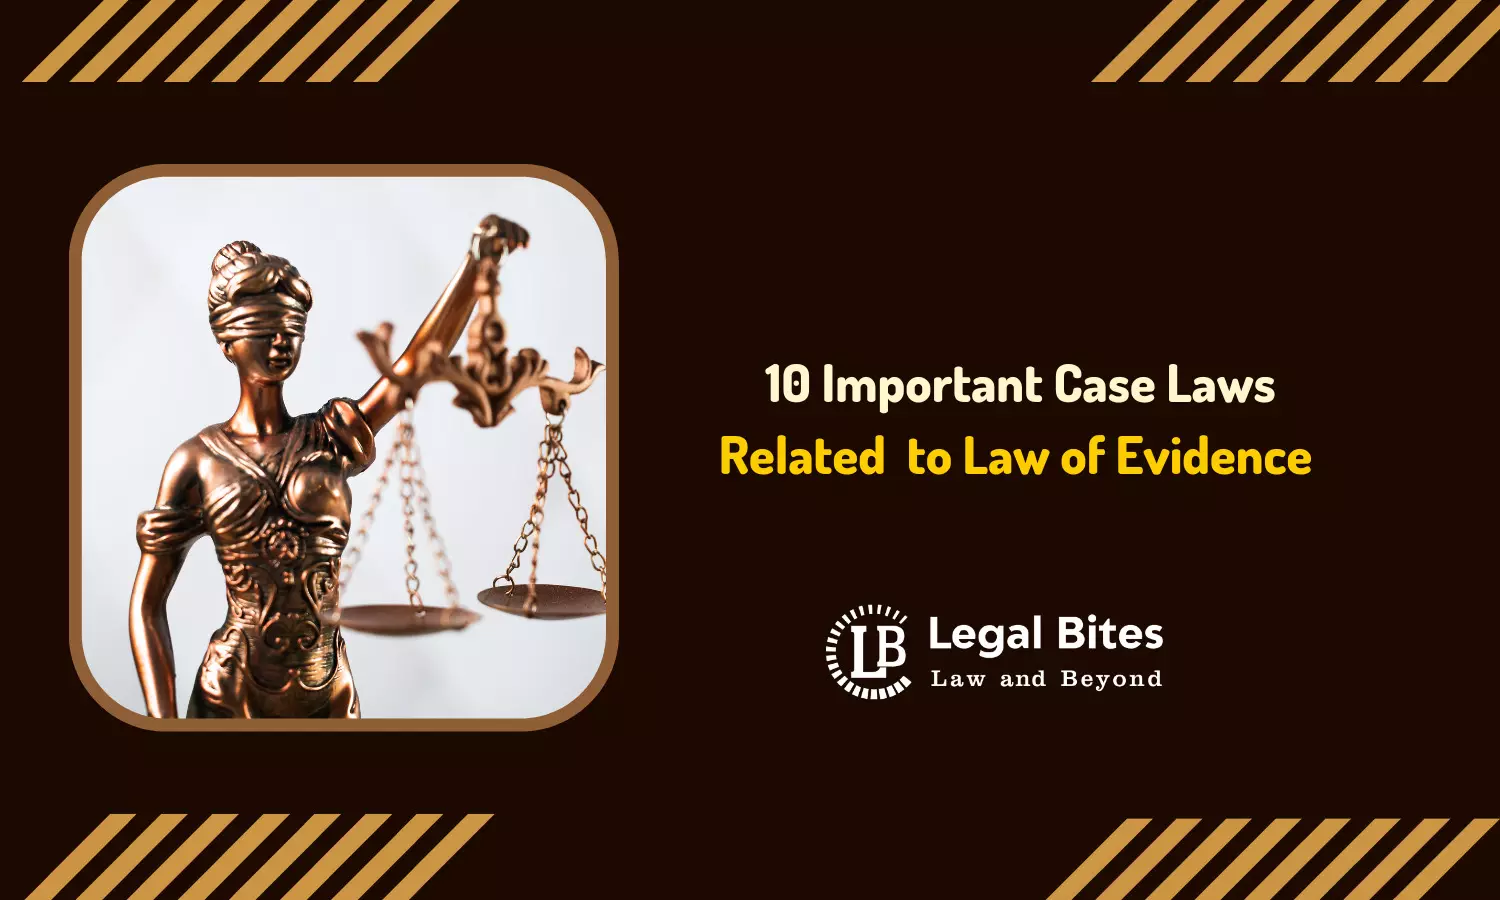 10 Important Case Laws Related to Law of Evidence